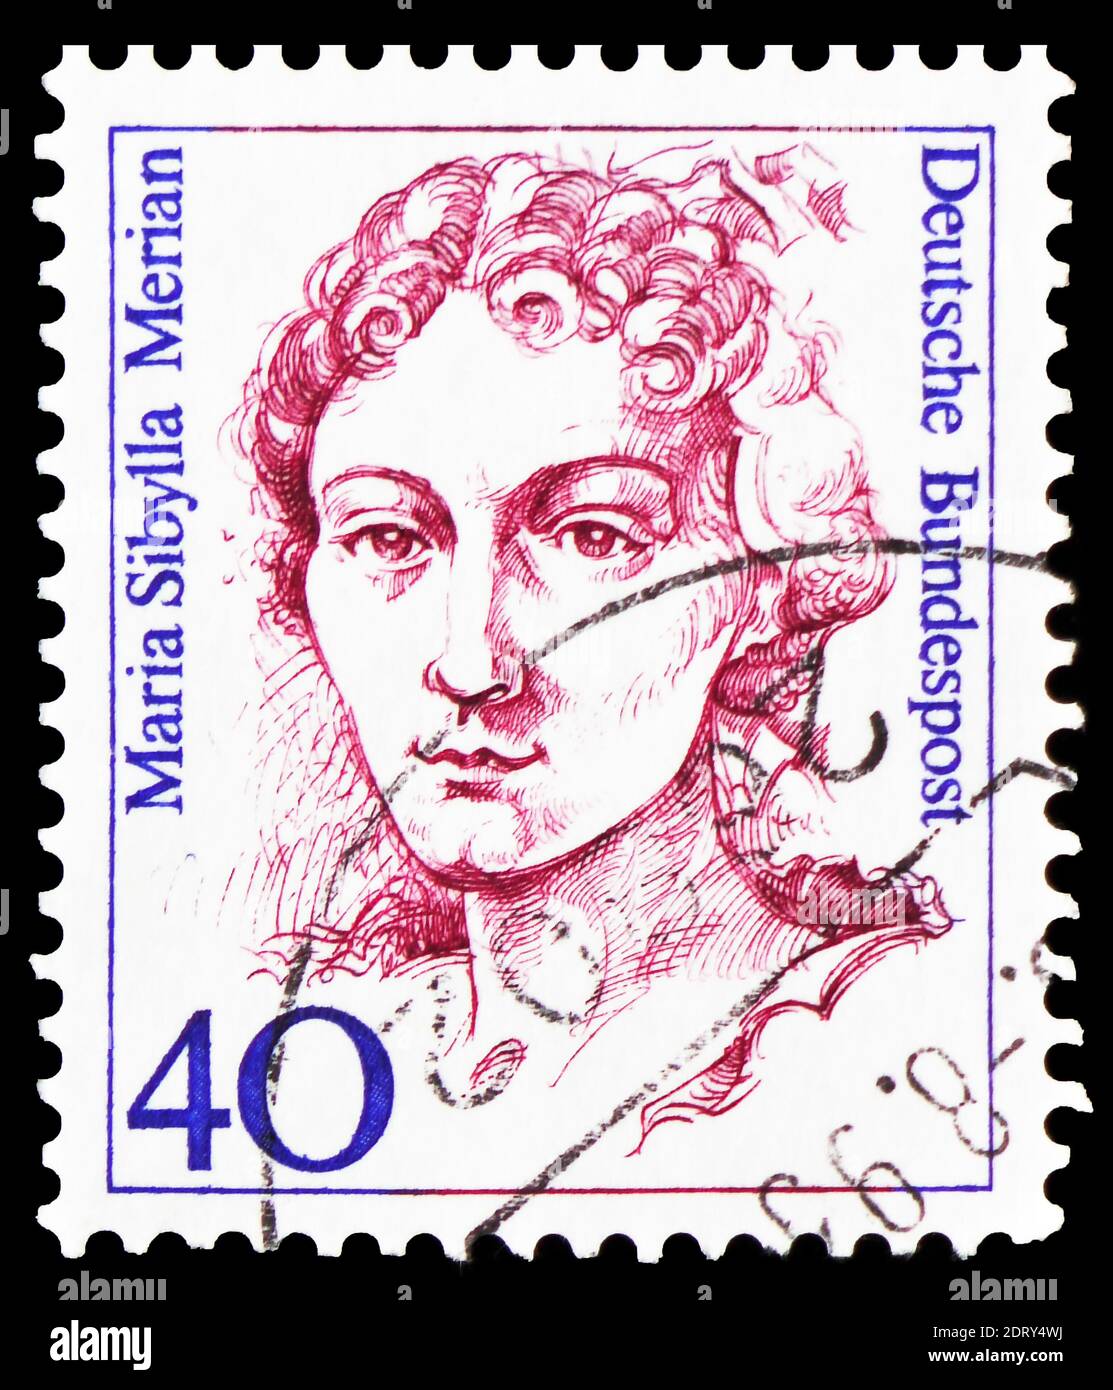 MOSCOW, RUSSIA - FEBRUARY 20, 2019: A stamp printed in Germany, Federal Republic, shows Maria Sibylla Merian (1647-1717), painter, naturalist and scie Stock Photo